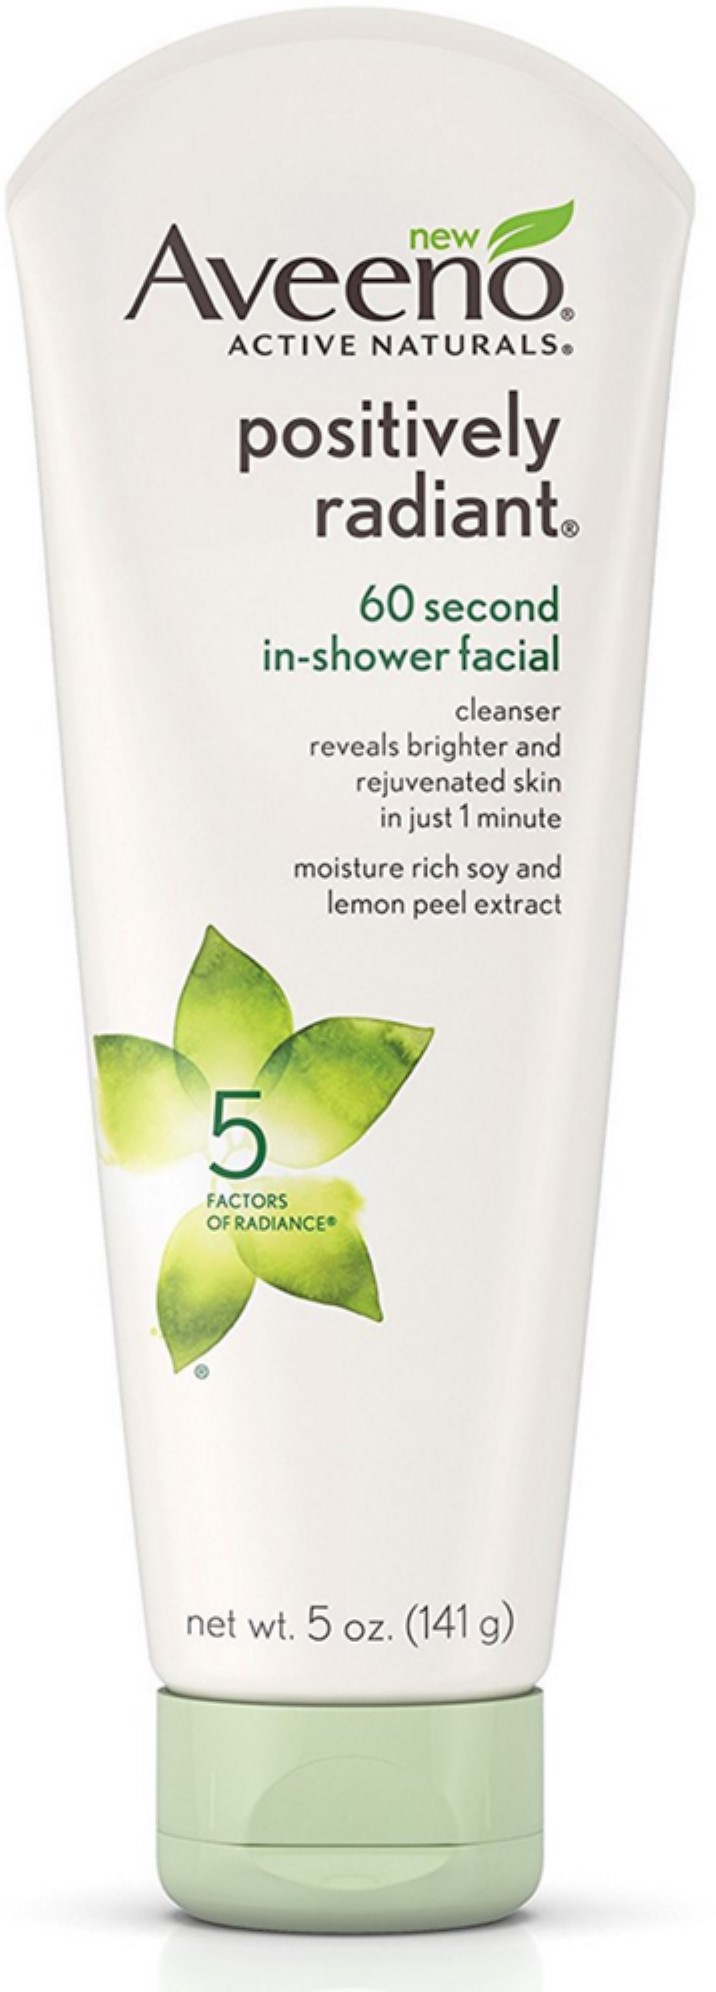 Aveeno Active Naturals Positively Radiant 60 Second In-Shower Facial Cleanser 5 oz (Pack of 4) - image 1 of 7